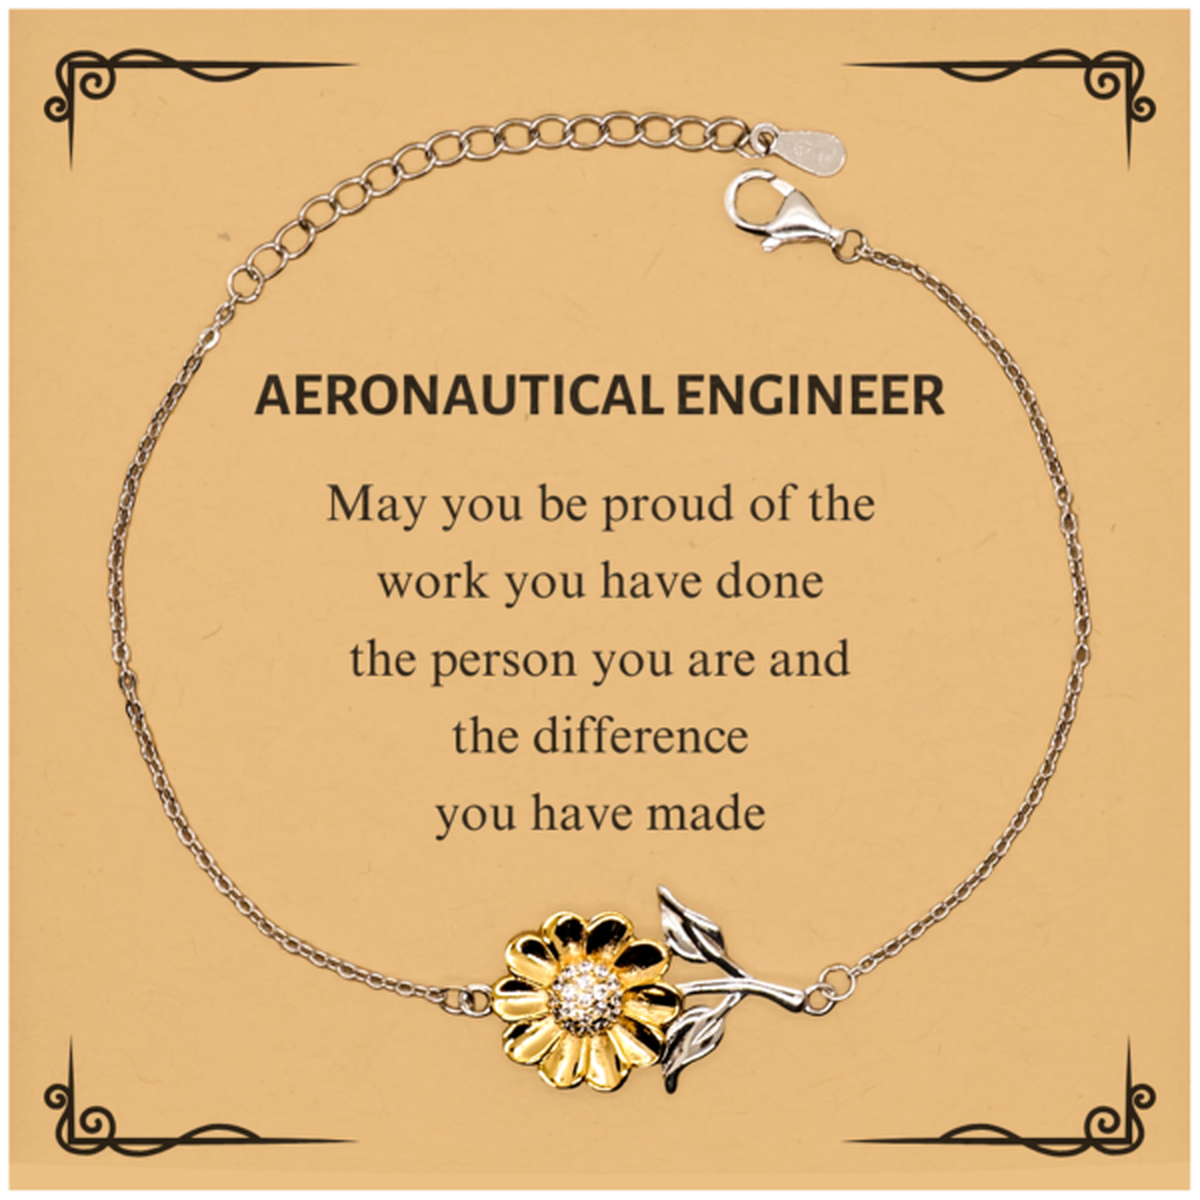 Aeronautical Engineer May you be proud of the work you have done, Retirement Aeronautical Engineer Sunflower Bracelet for Colleague Appreciation Gifts Amazing for Aeronautical Engineer